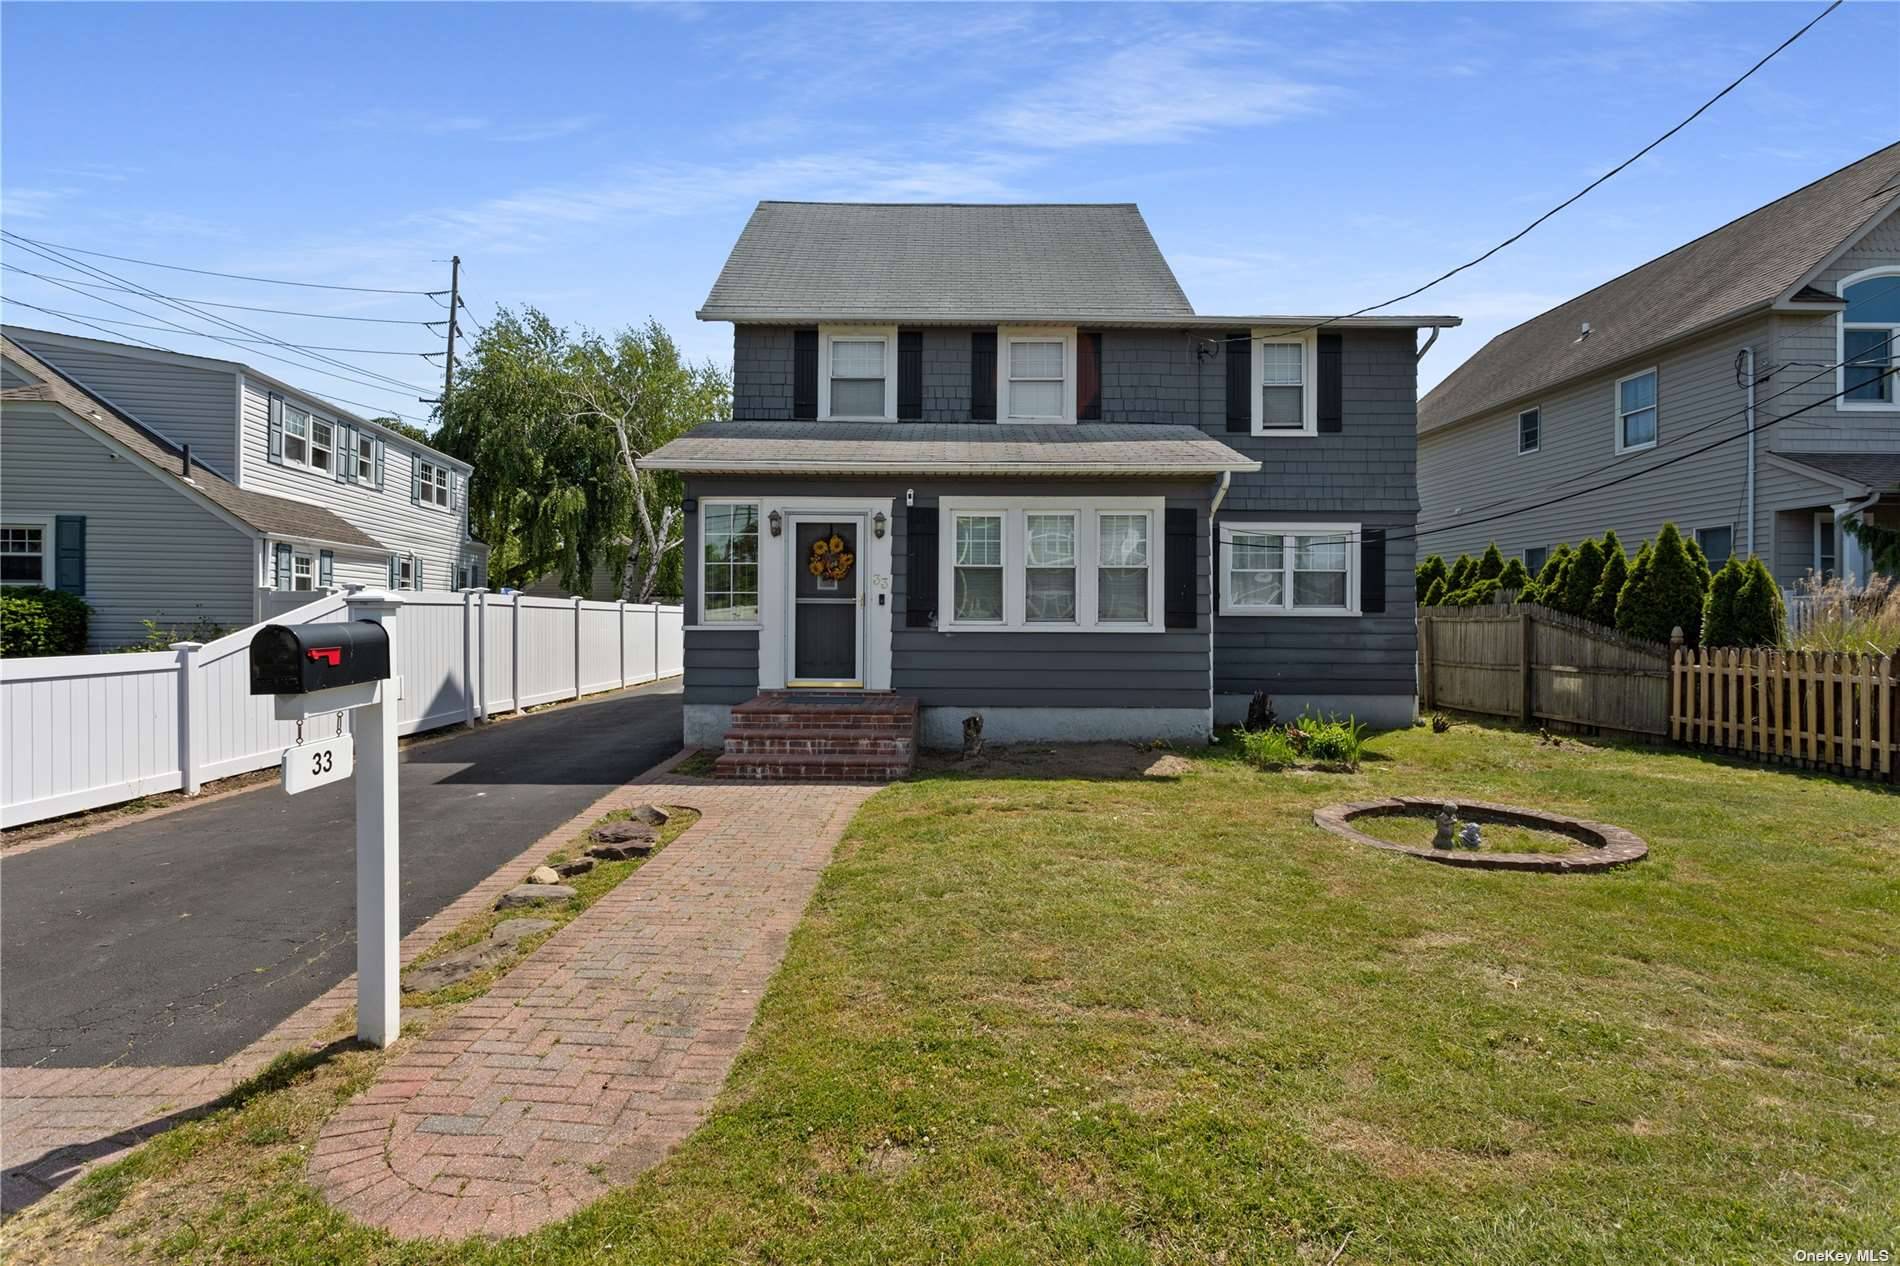 Welcome to 33 Maplewood Rd in the heart of West Babylon !